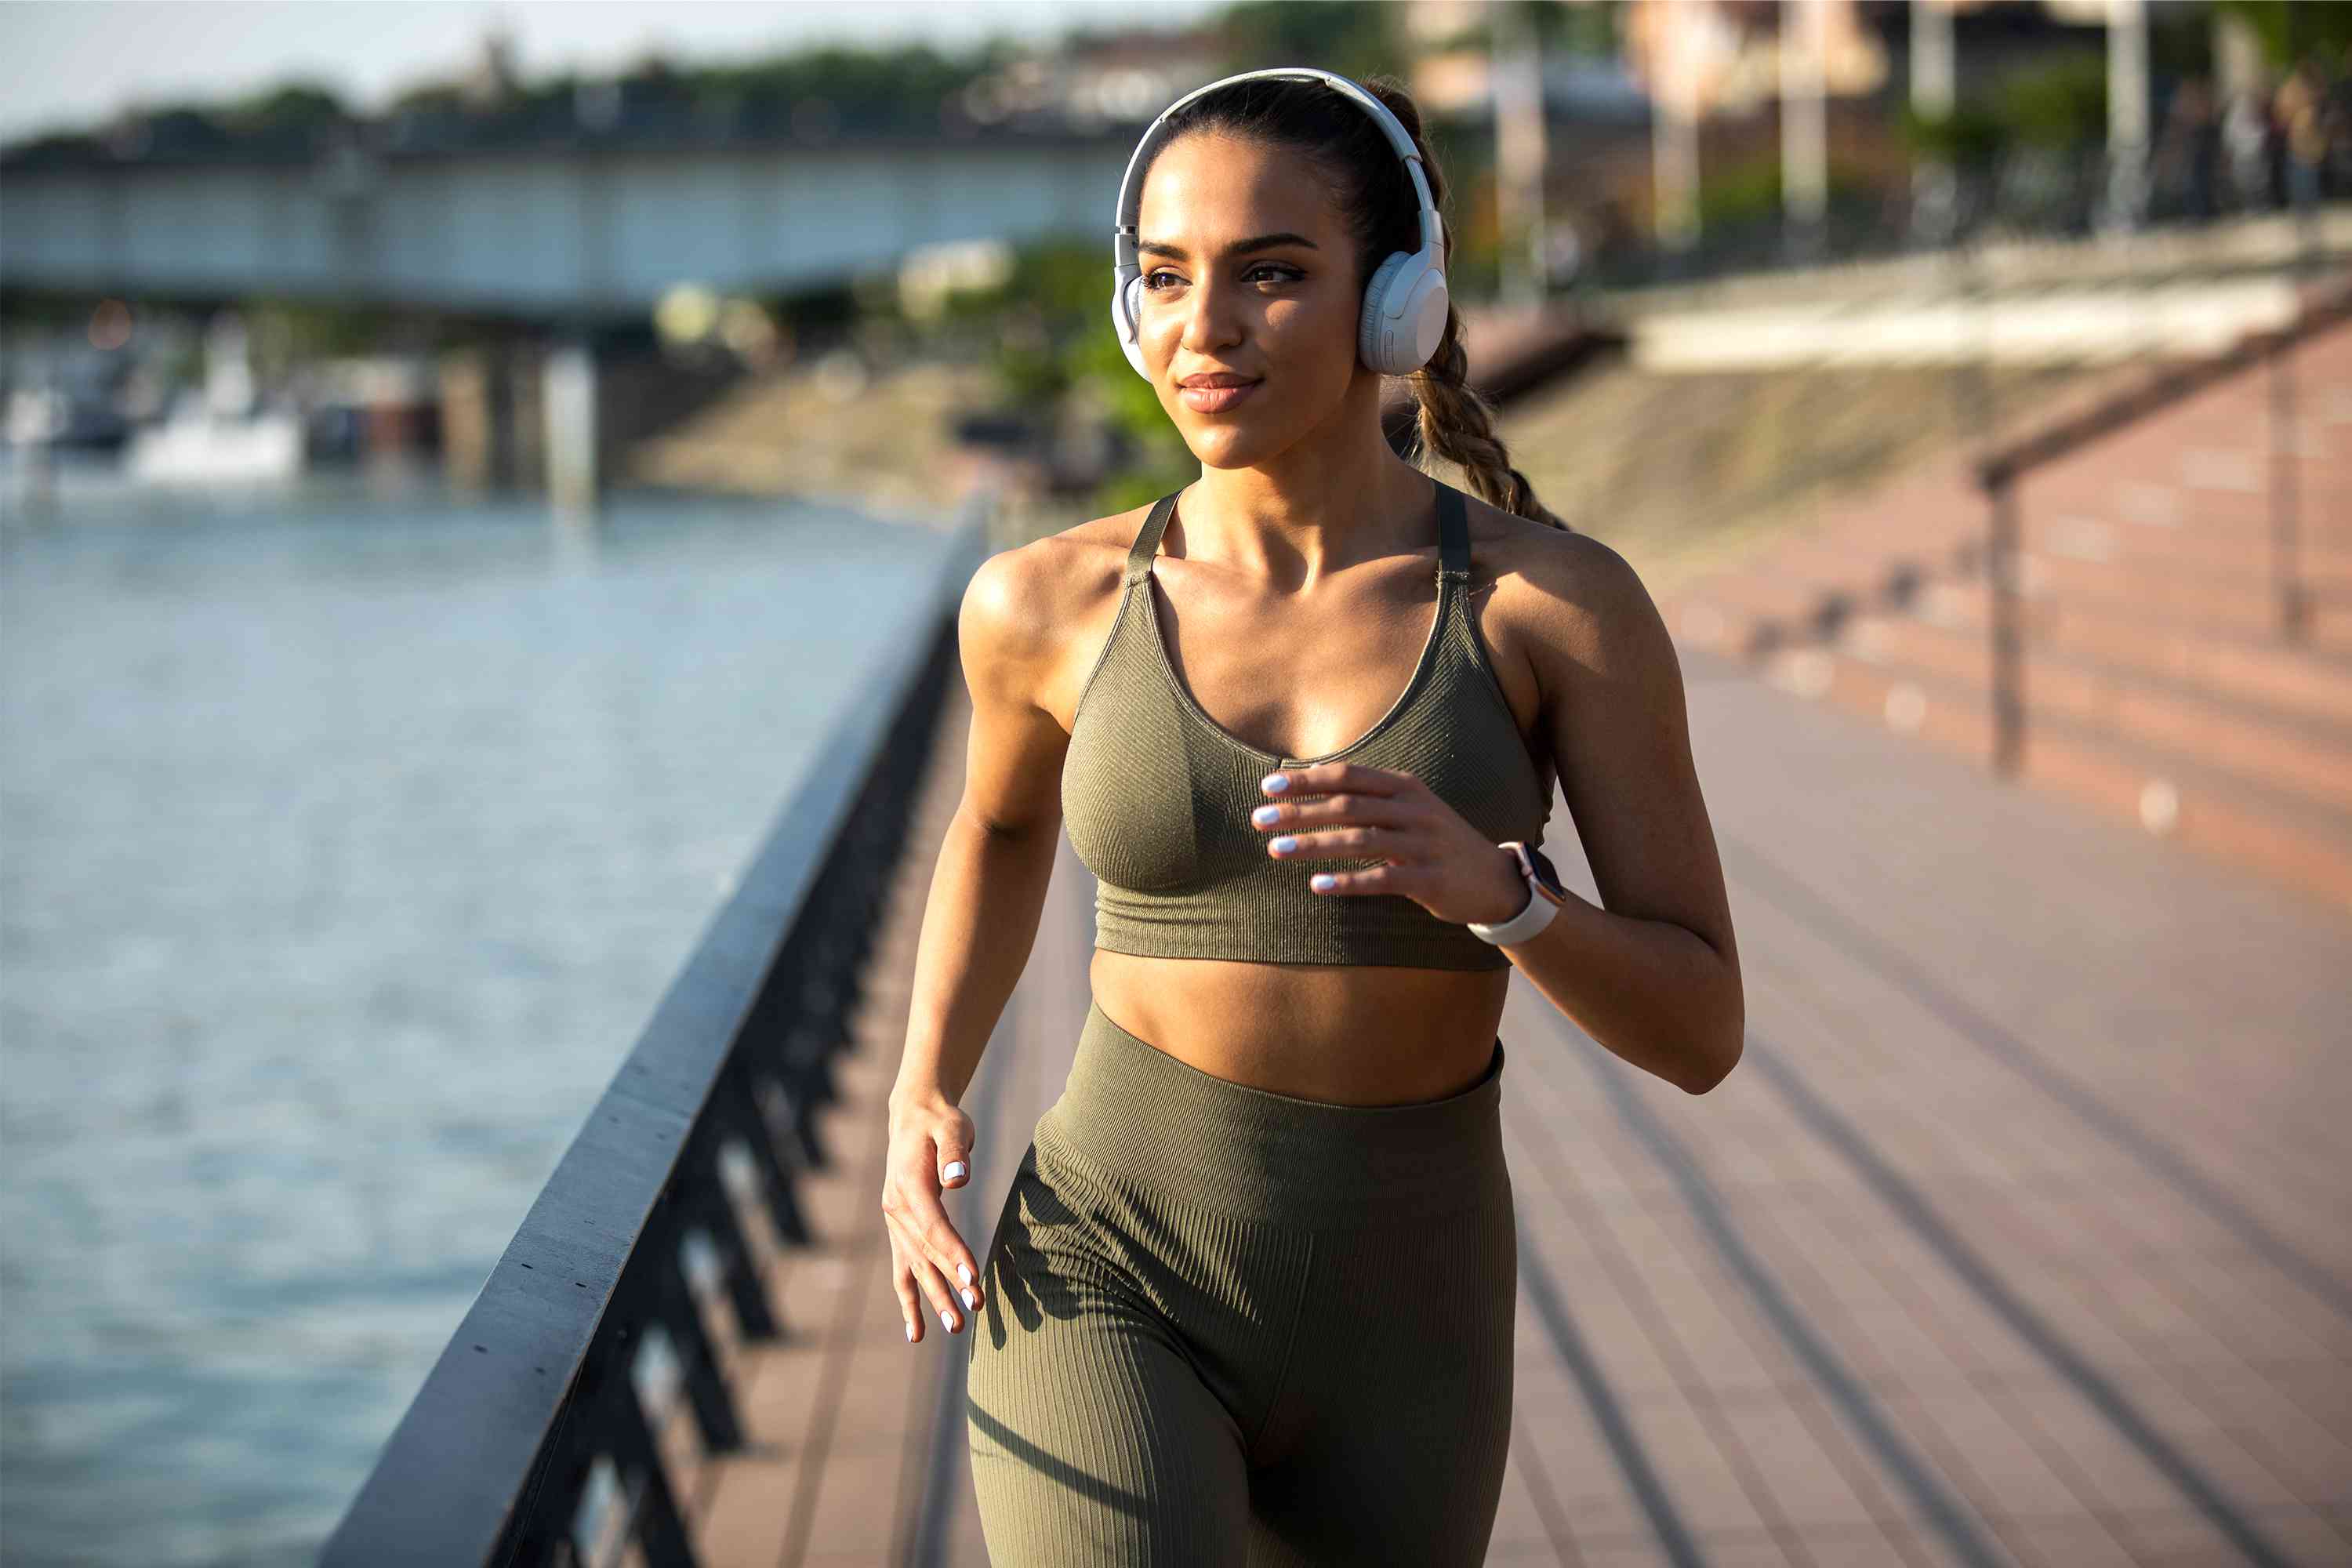 3 steps to workout motivation, according to experts